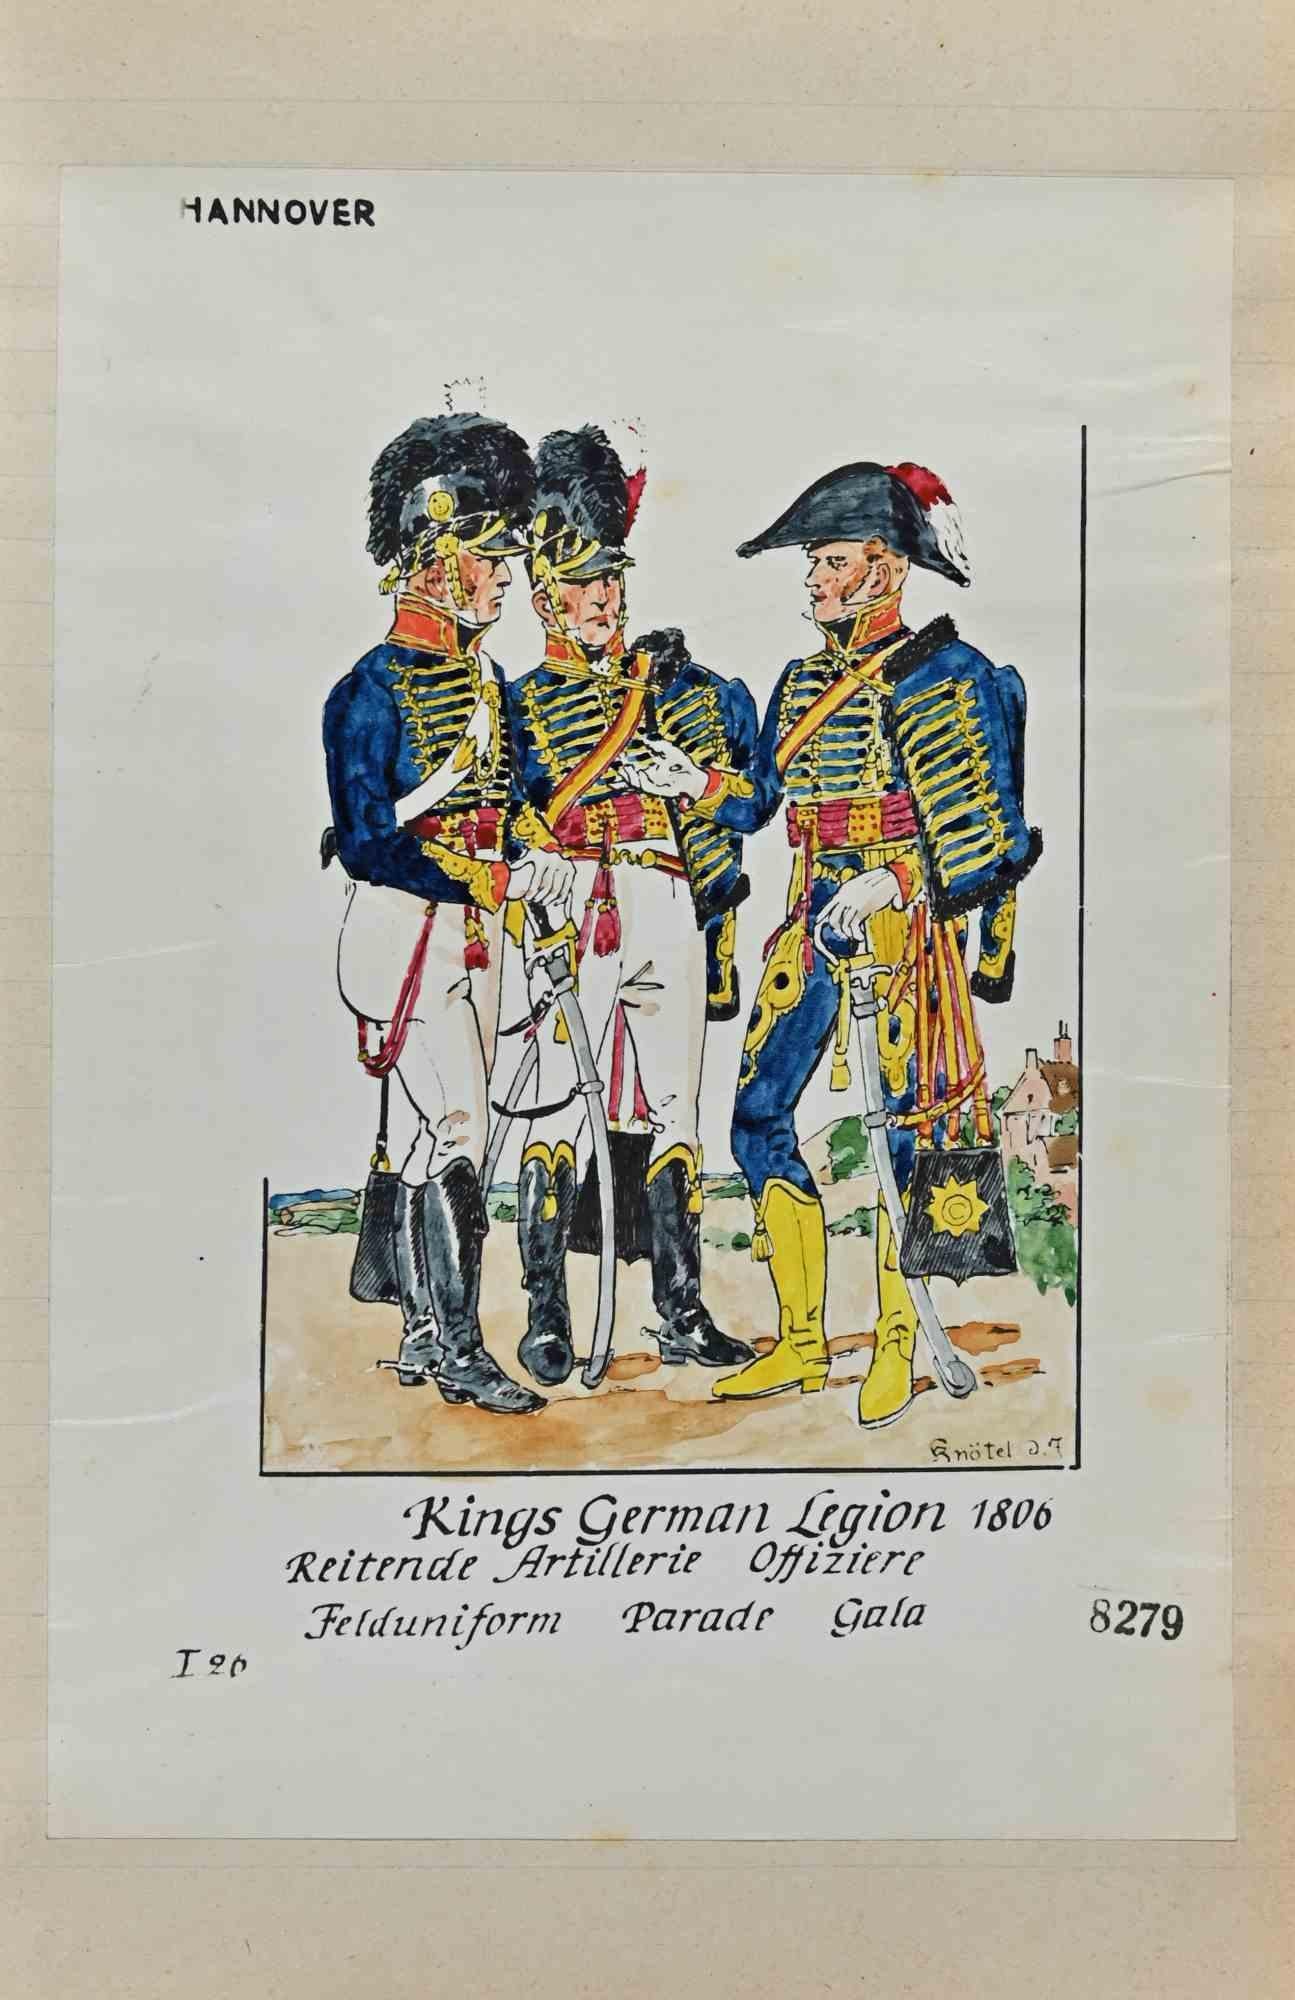 German Legion is an original drawing in ink and watercolor realized by Herbert Knotel in 1930/40s.

Good condition except for being aged.

The artwork is depicted through strong lines in well-balanced conditions.

Herbert Knotel was a german artist,